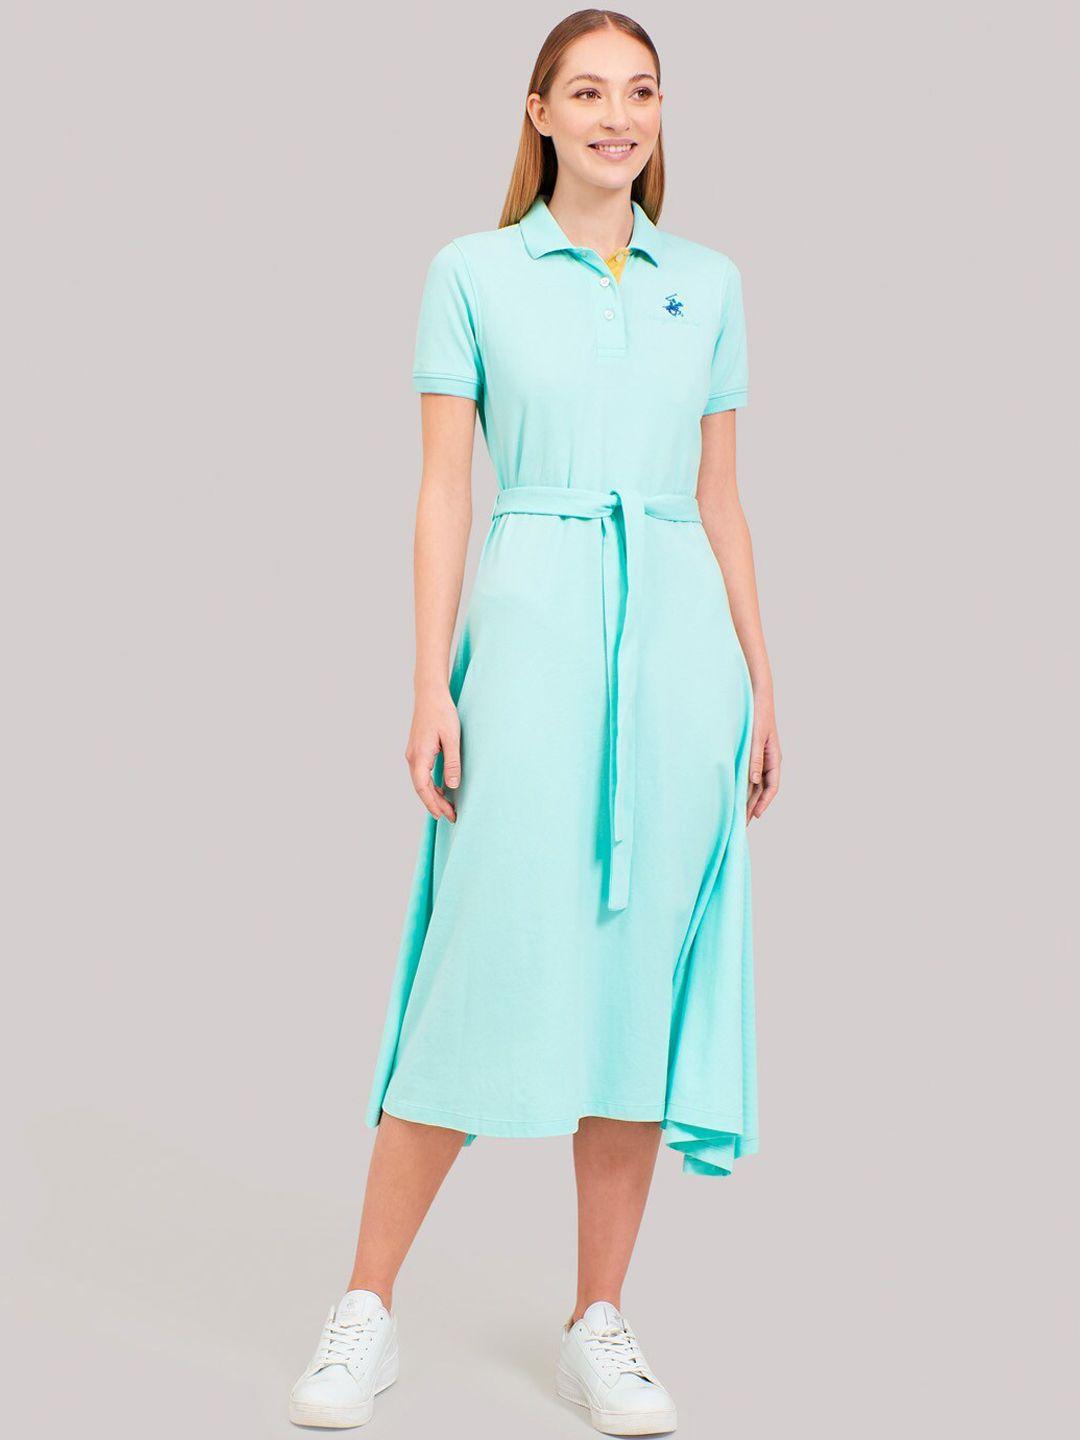 beverly hills polo club women turquoise blue solid shirt dress